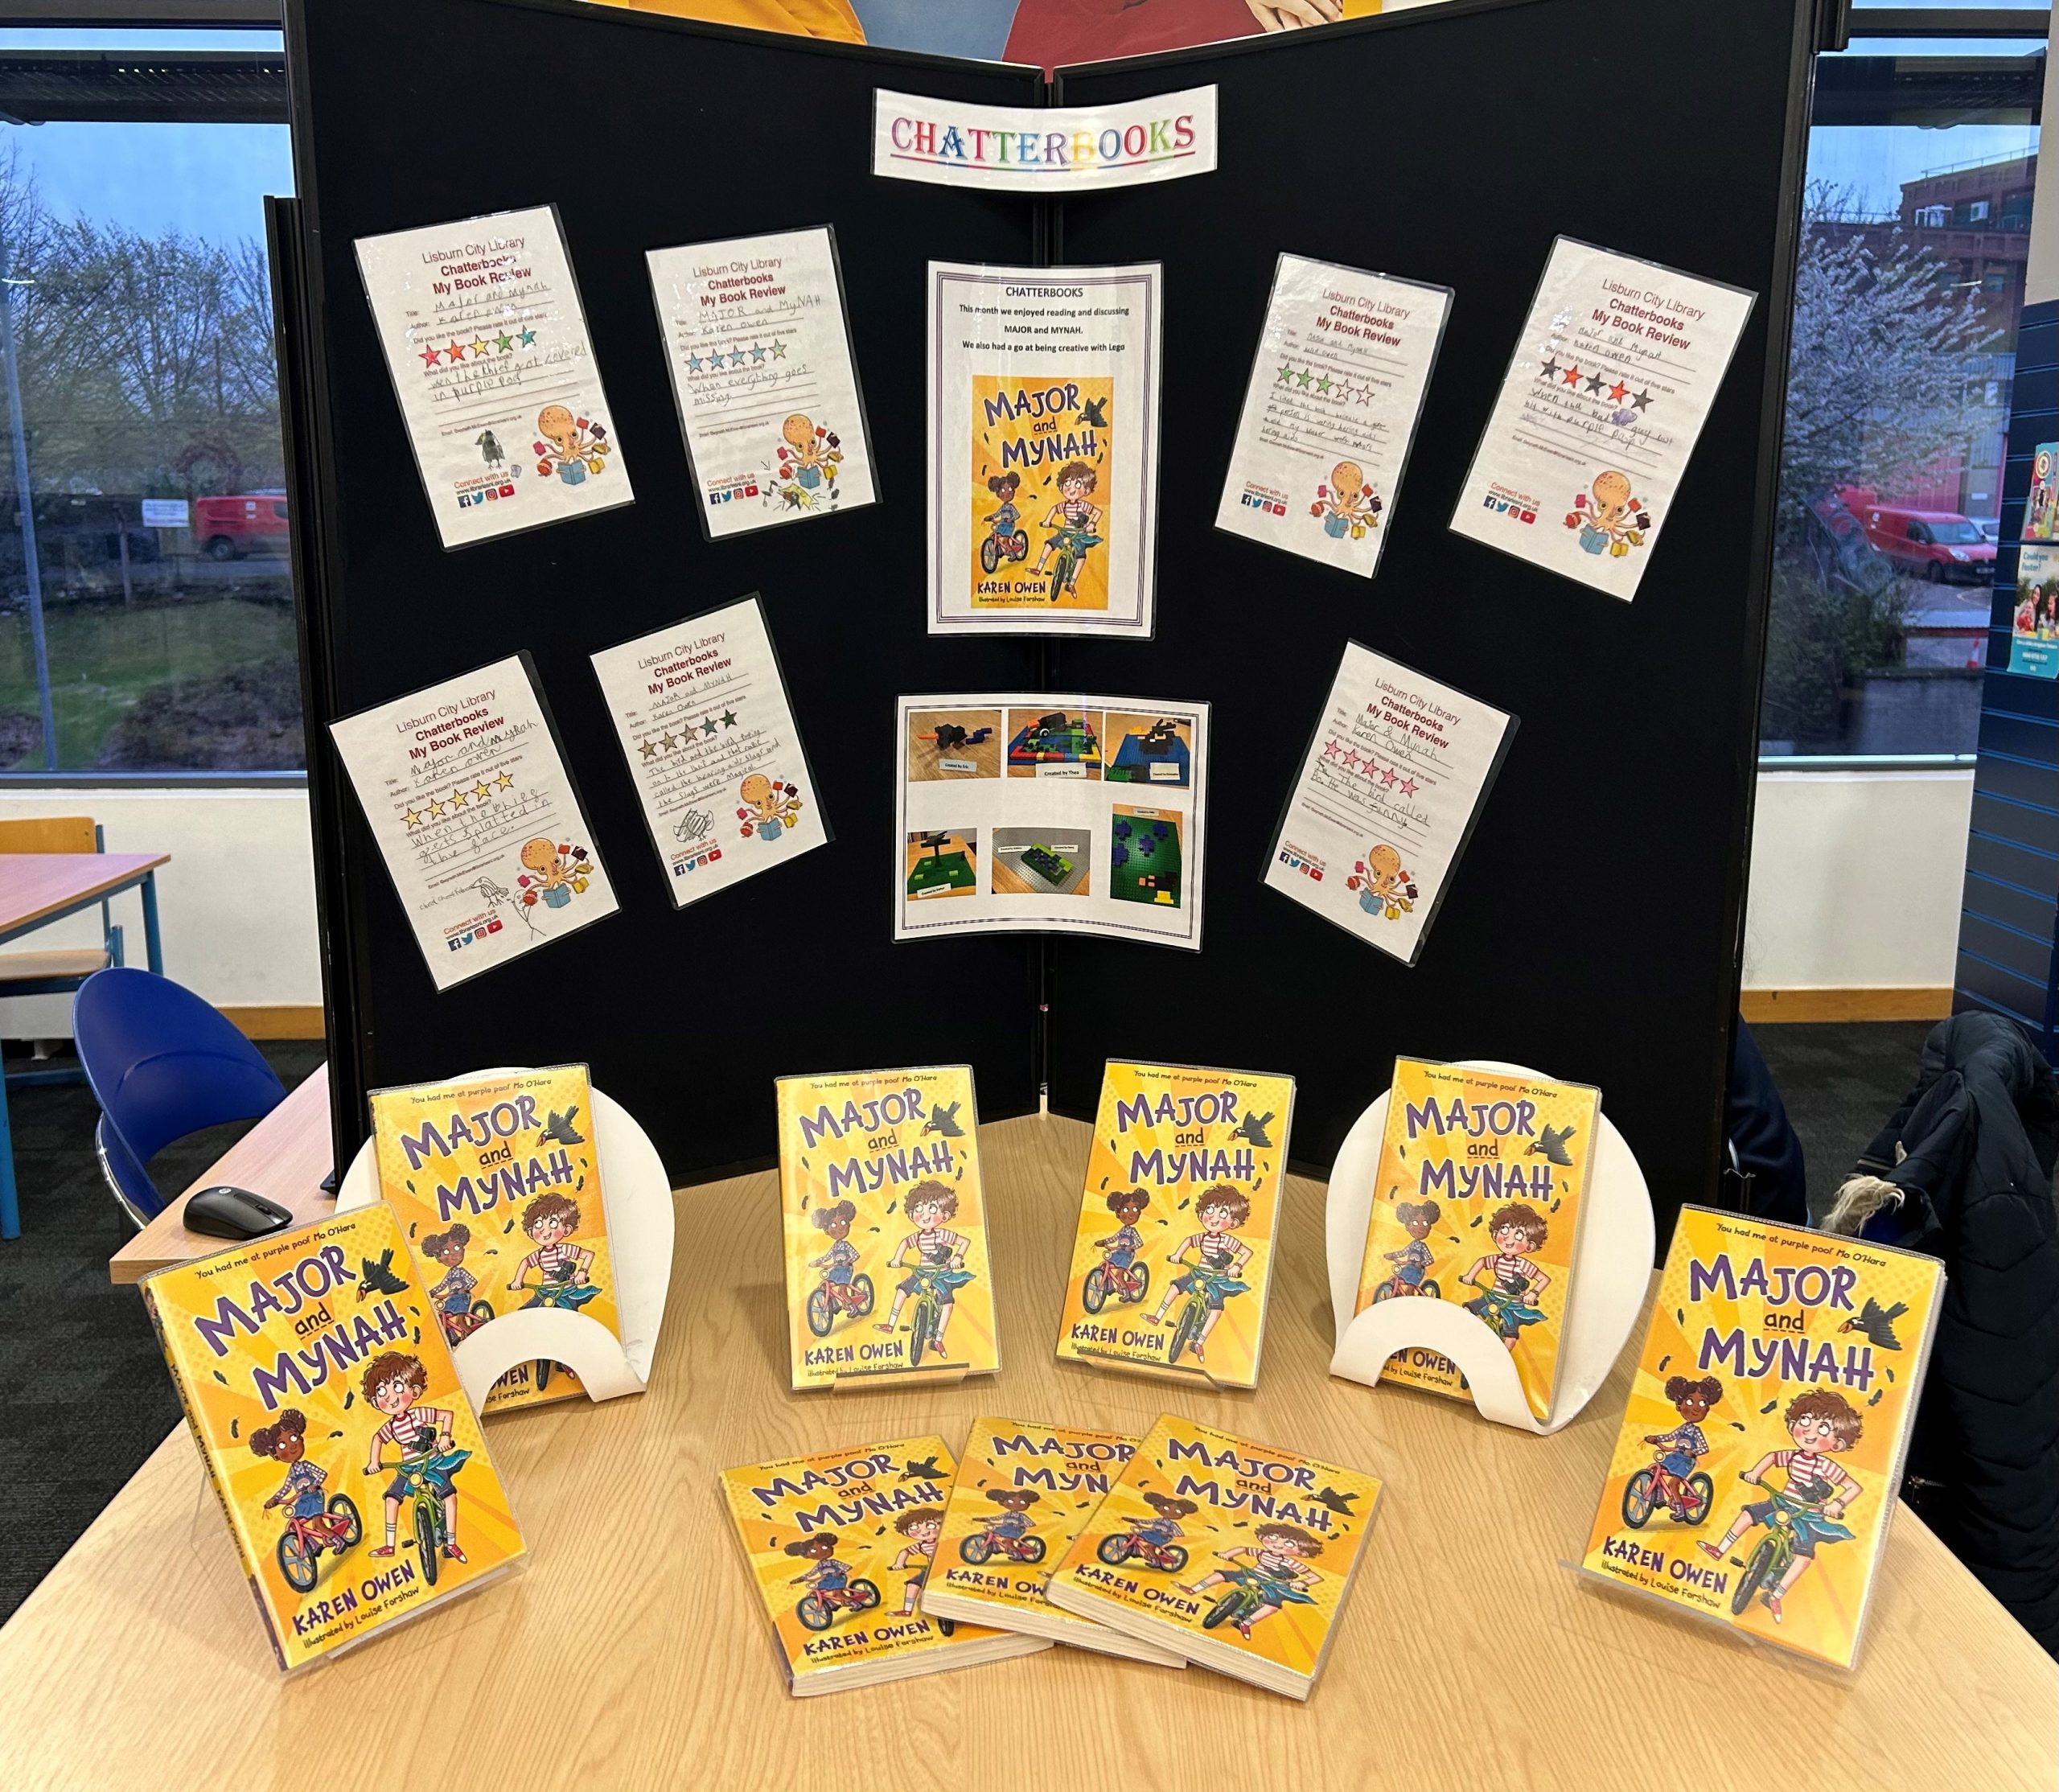 Display of Major and Mynah books and work at Lisburn Library